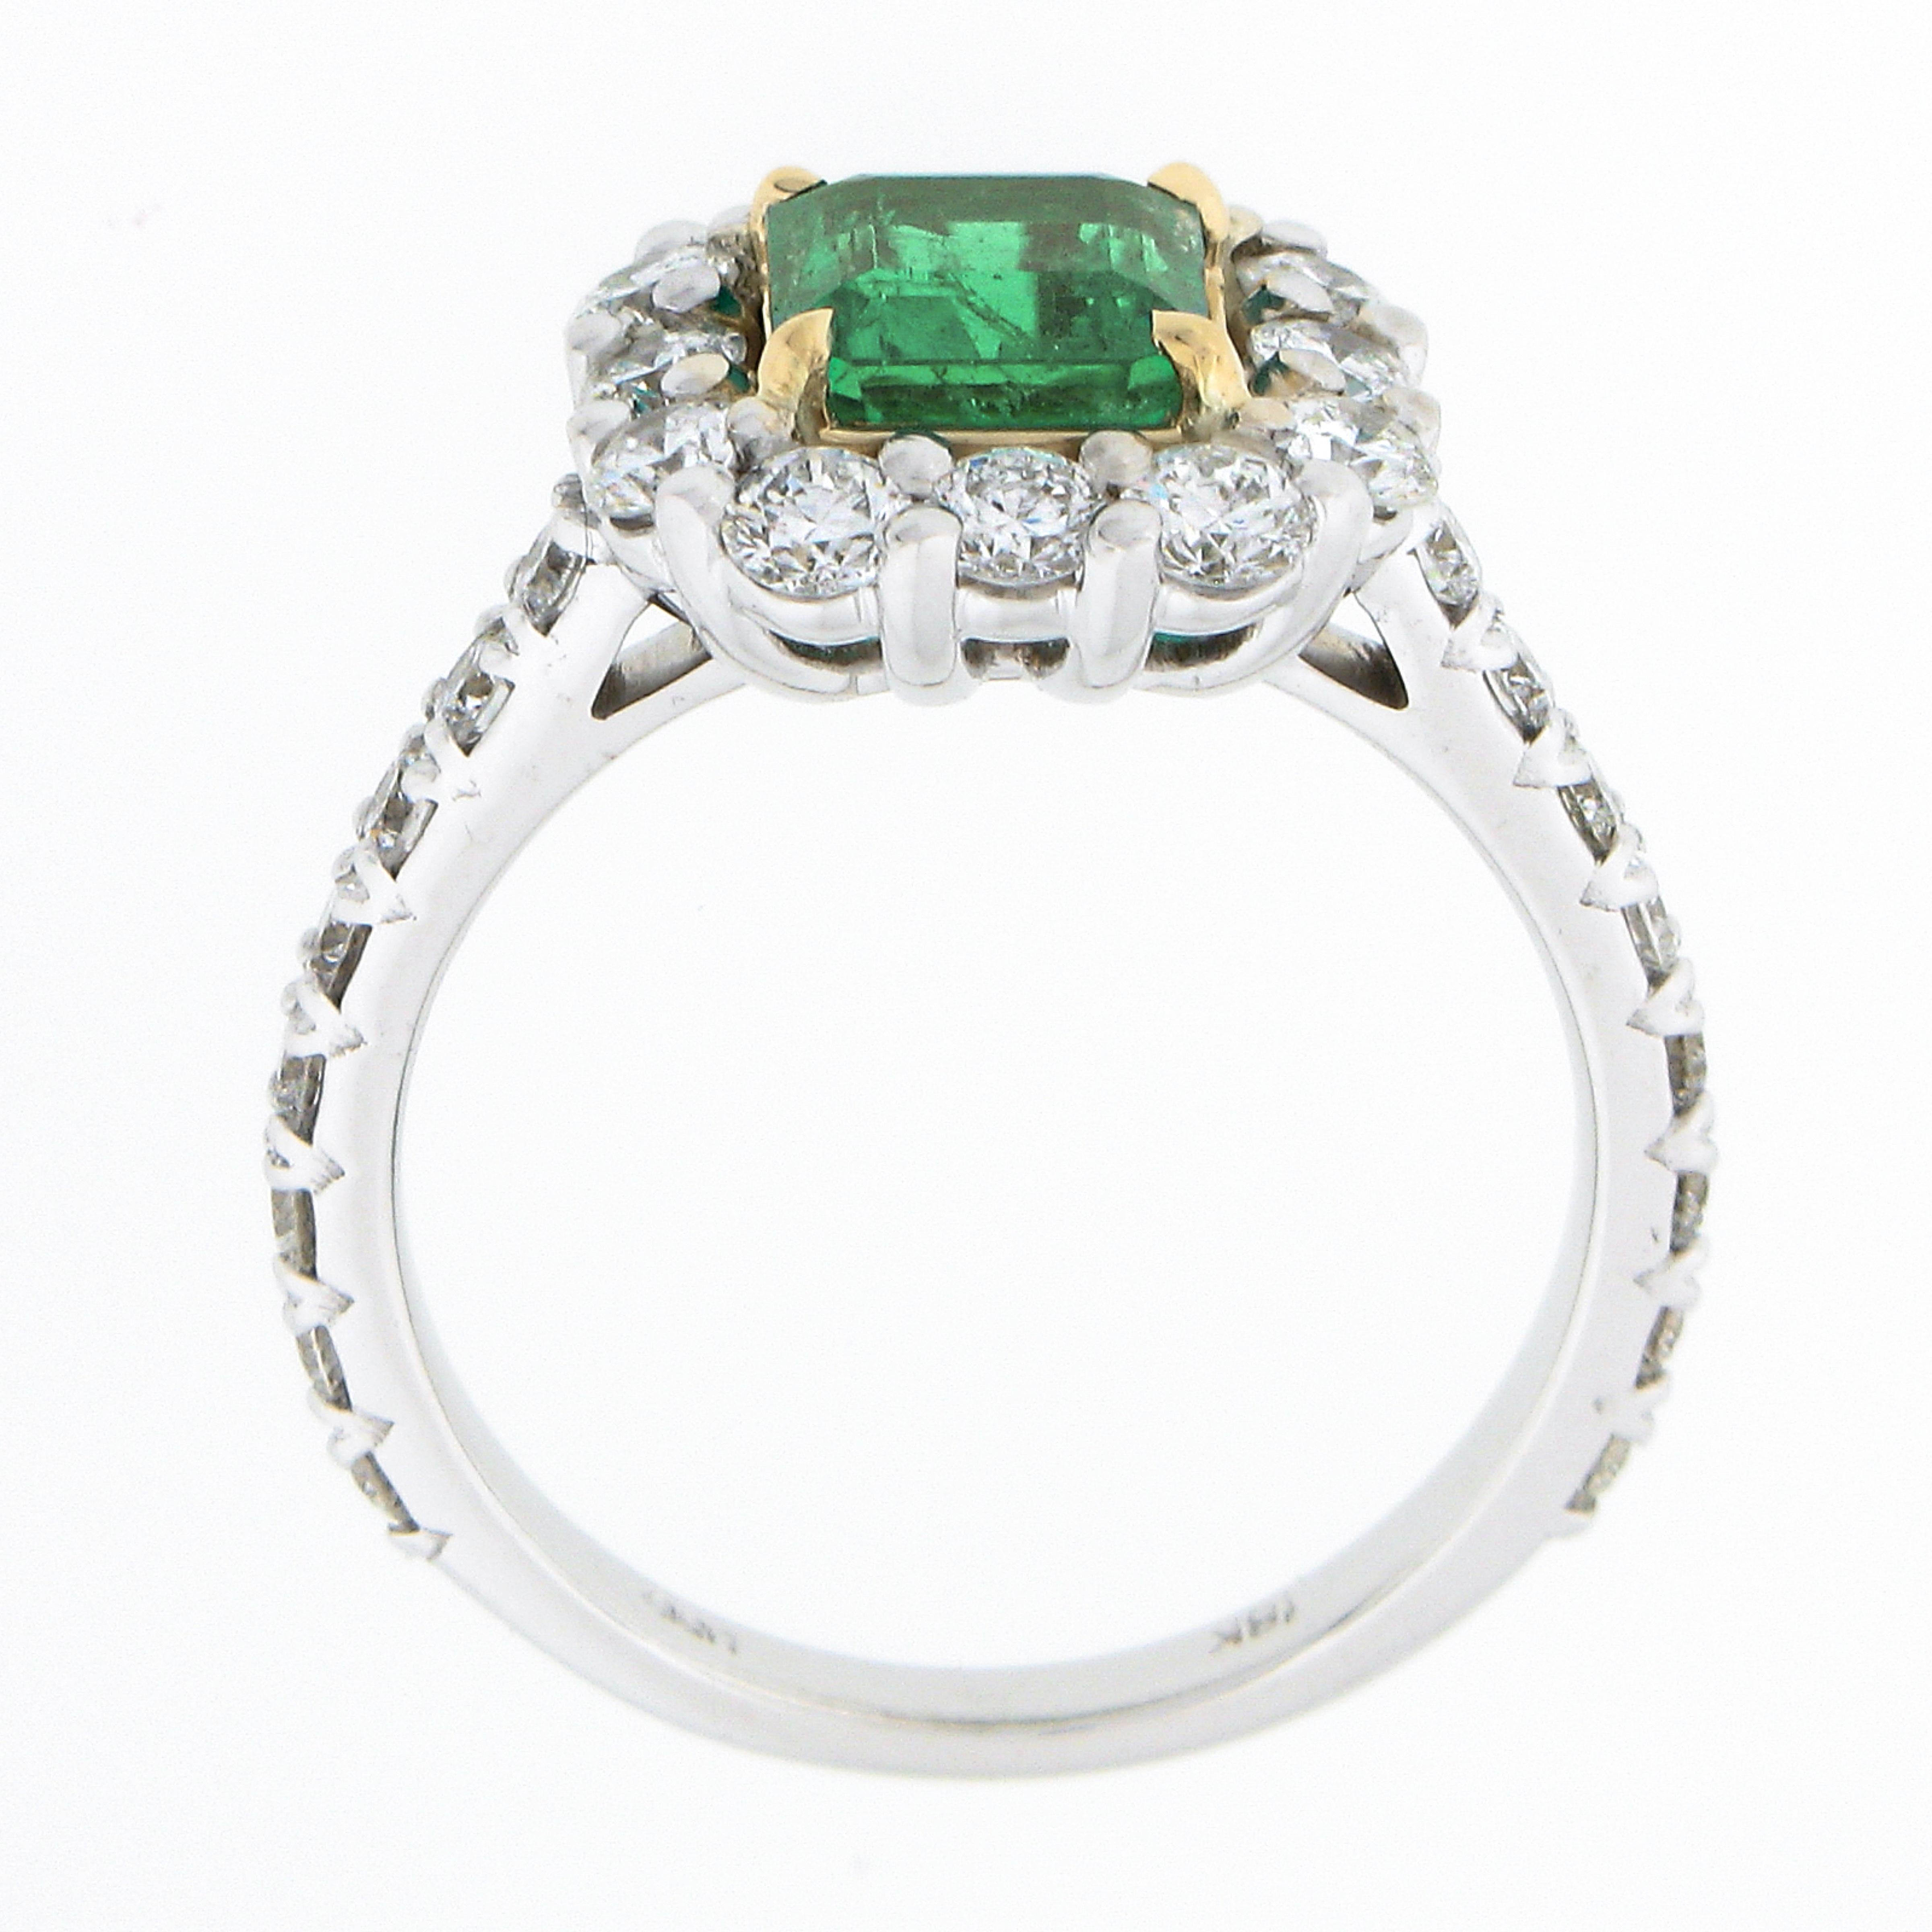 New 18k TT Gold 2.51ctw GIA Colombia Green Emerald w/ Diamond Halo Cocktail Ring For Sale 2